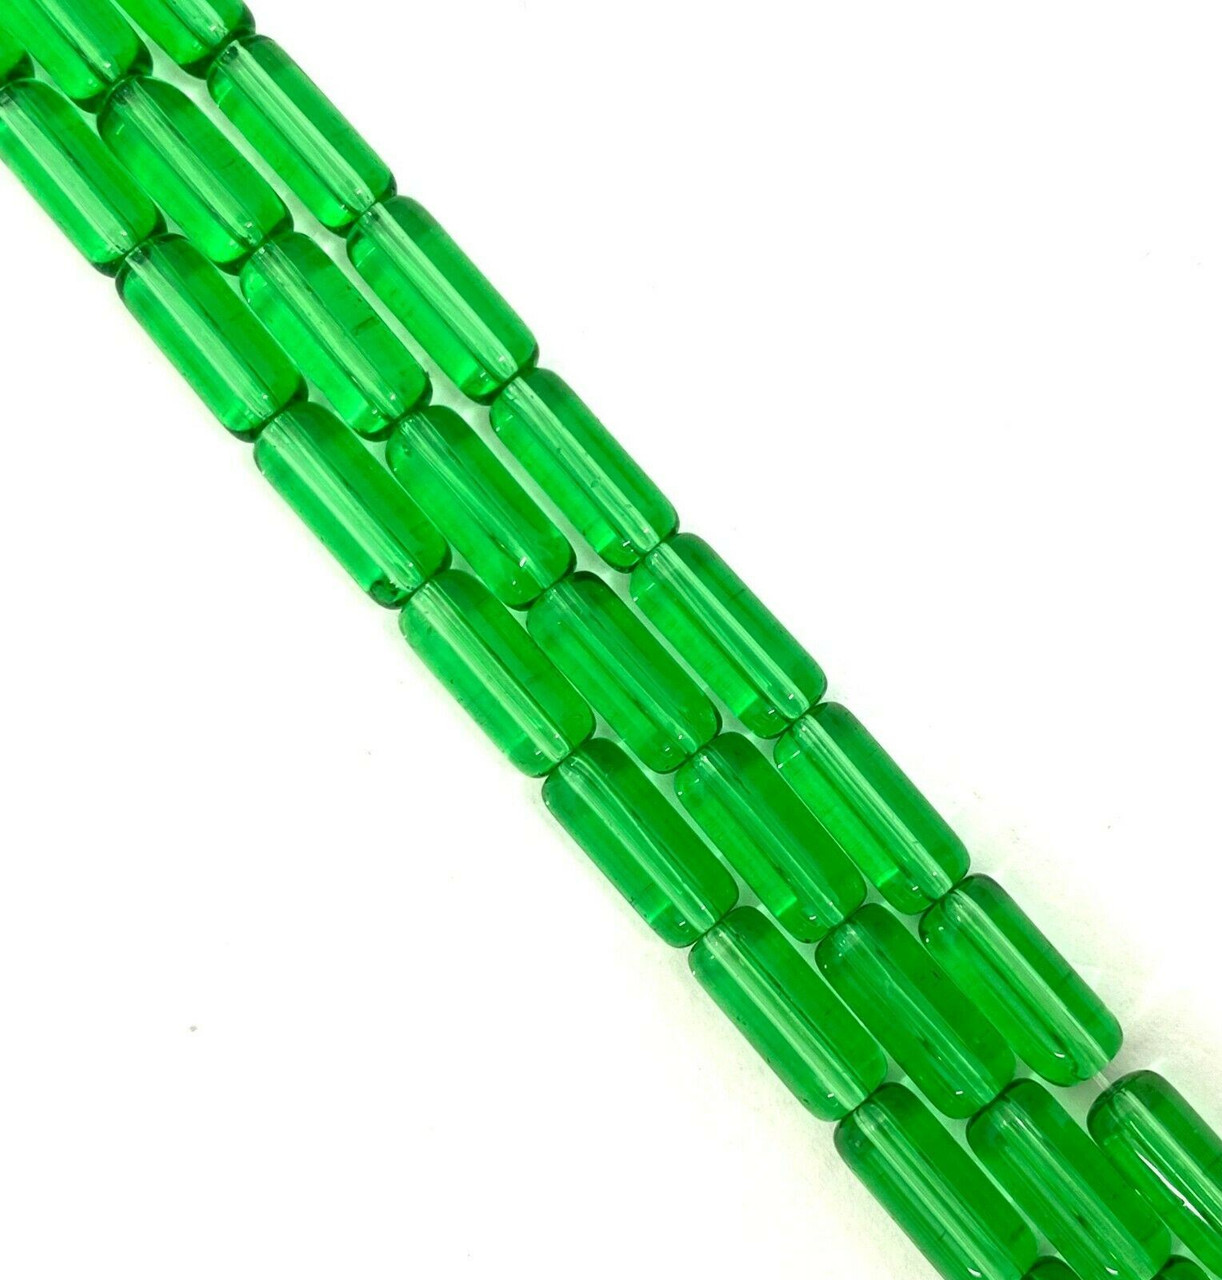 10x4mm Glass Tube Beads, GRASS GREEN, approx 12" strand, 32 beads